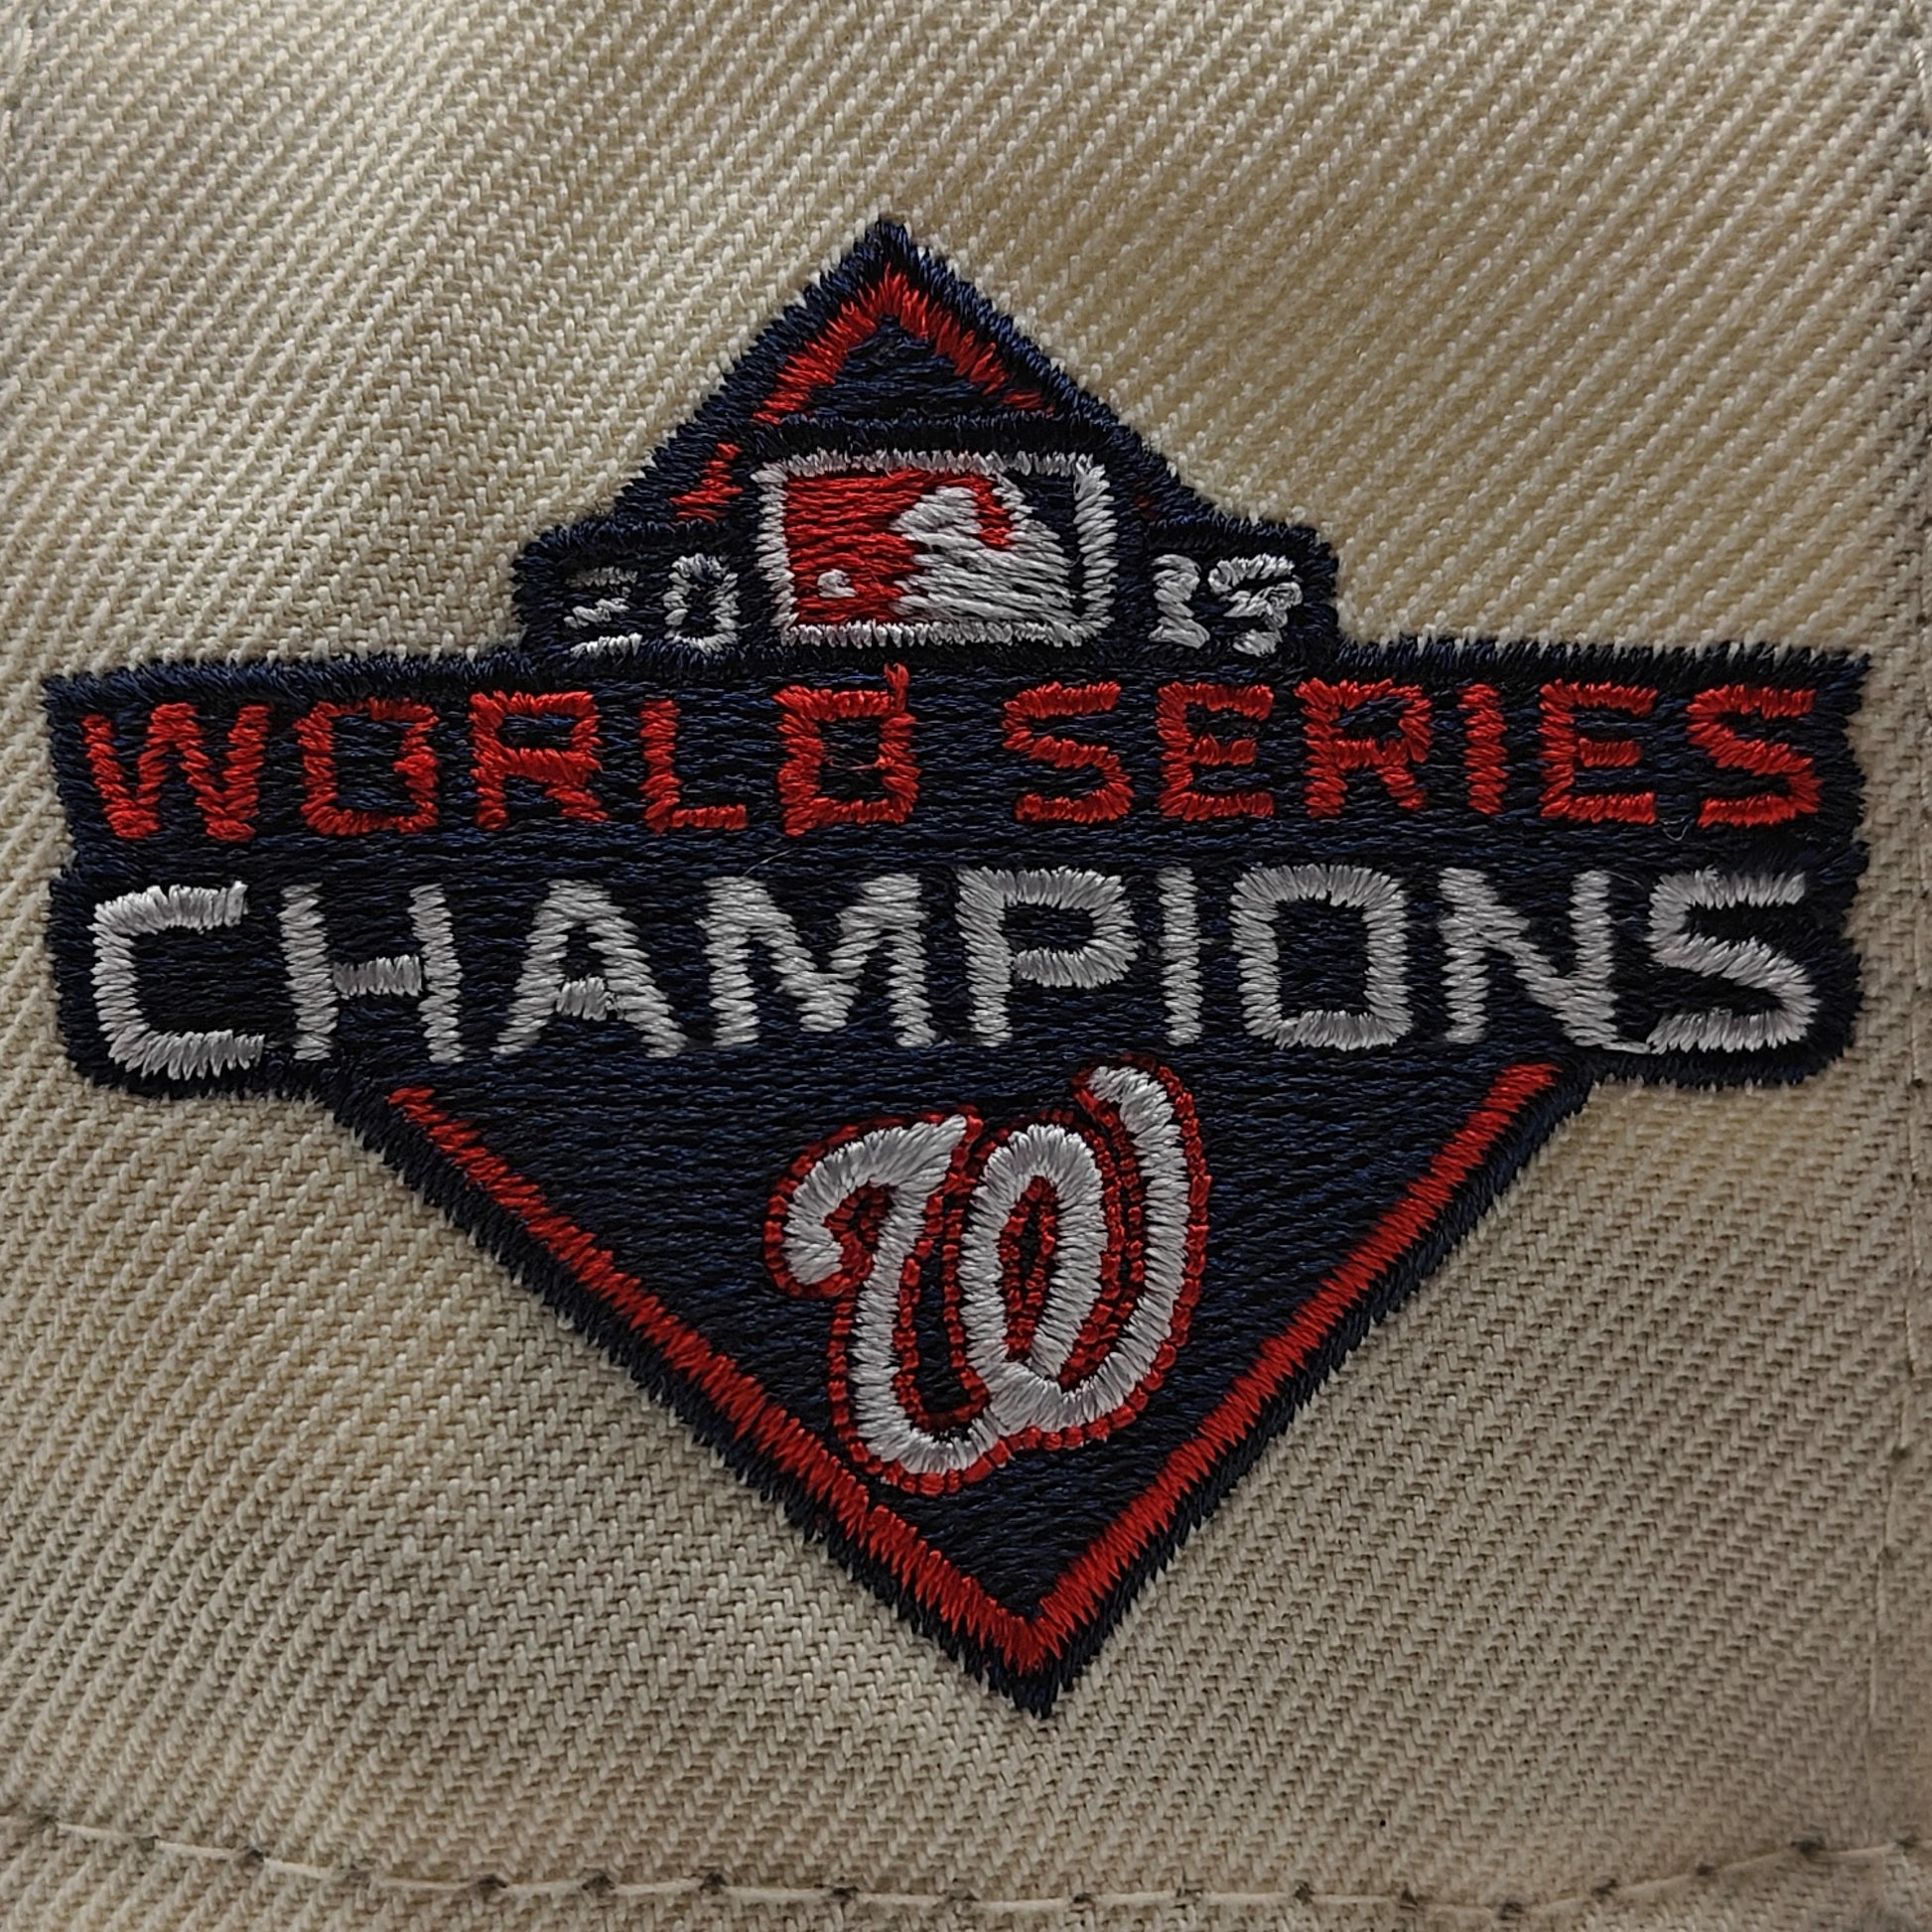 WASHINGTON NATIONALS World Series Champions Patch Official